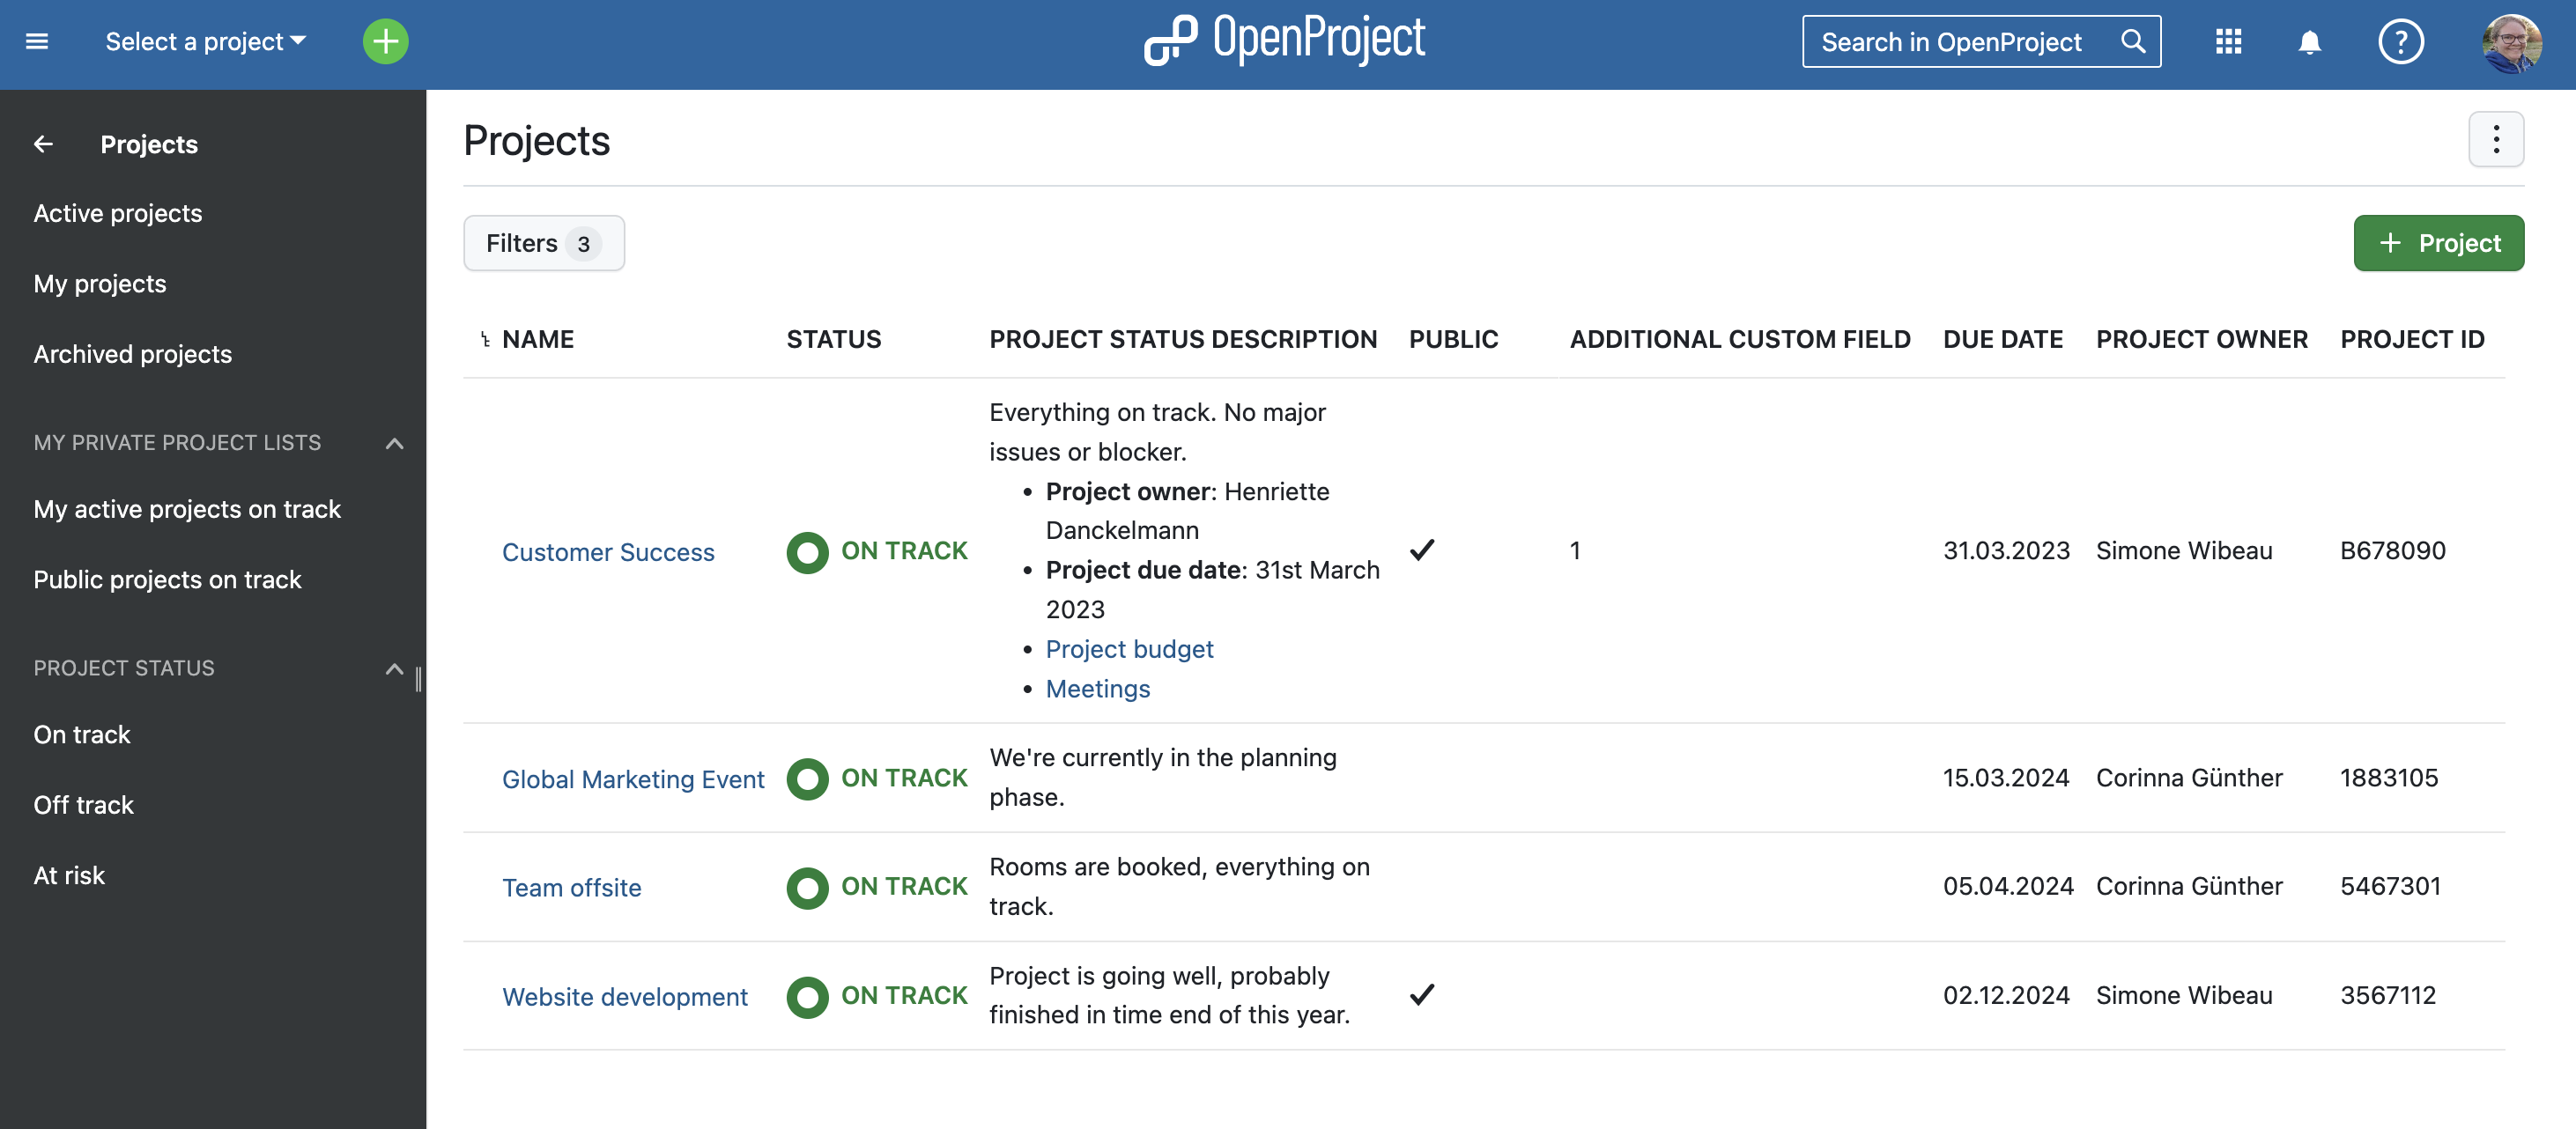 display custom fields for projects in the project list